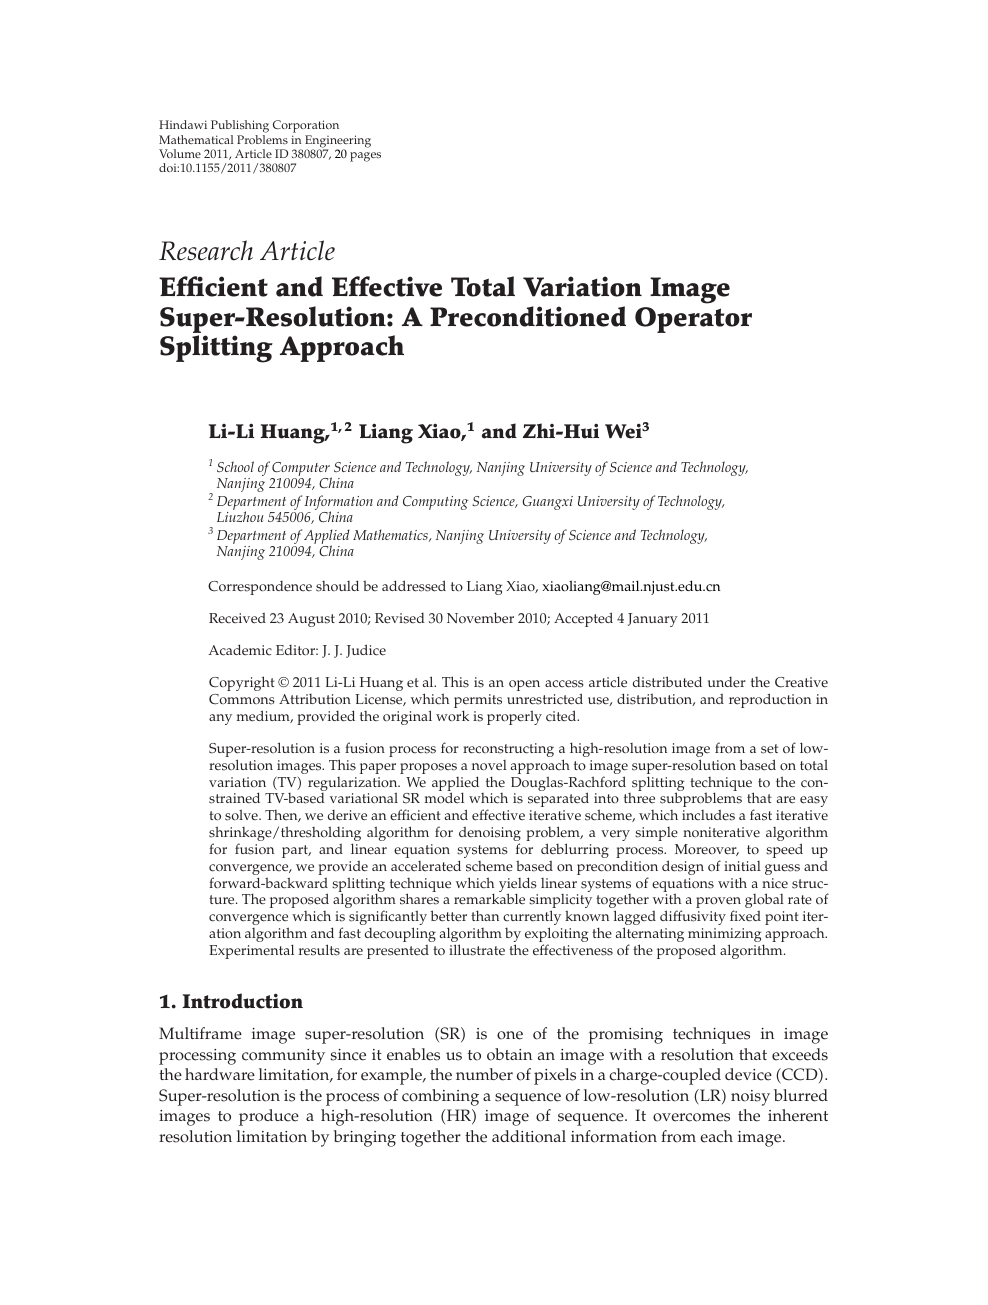 Efficient And Effective Total Variation Image Super Resolution A Preconditioned Operator Splitting Approach Topic Of Research Paper In Electrical Engineering Electronic Engineering Information Engineering Download Scholarly Article Pdf And Read